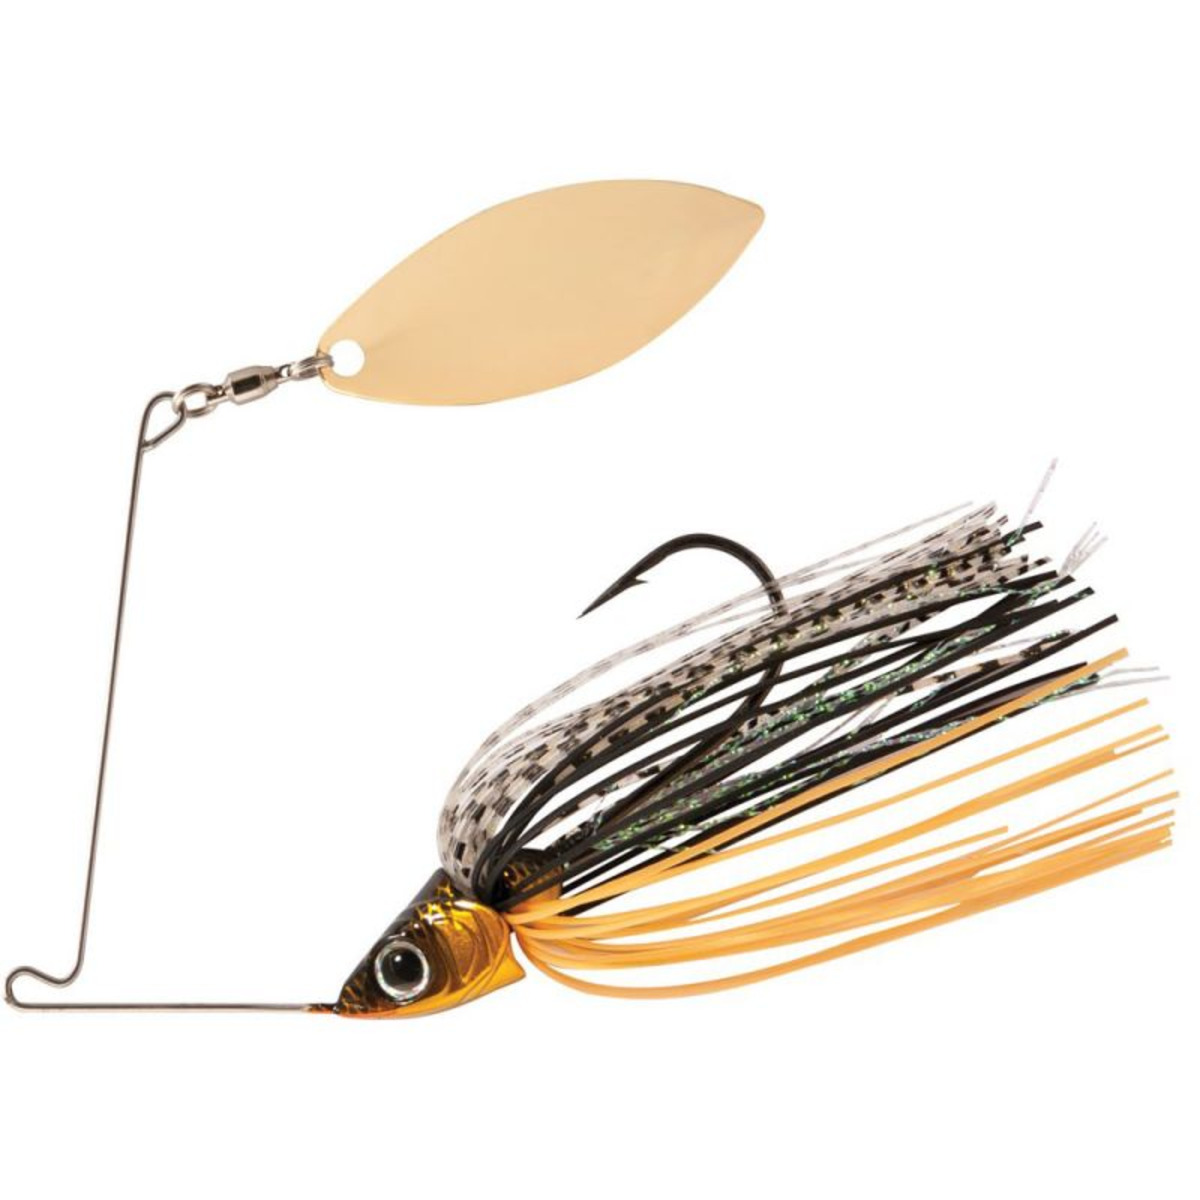 Rapture Sharp Spin Single Willow - 14.0 g - Brownie Shad